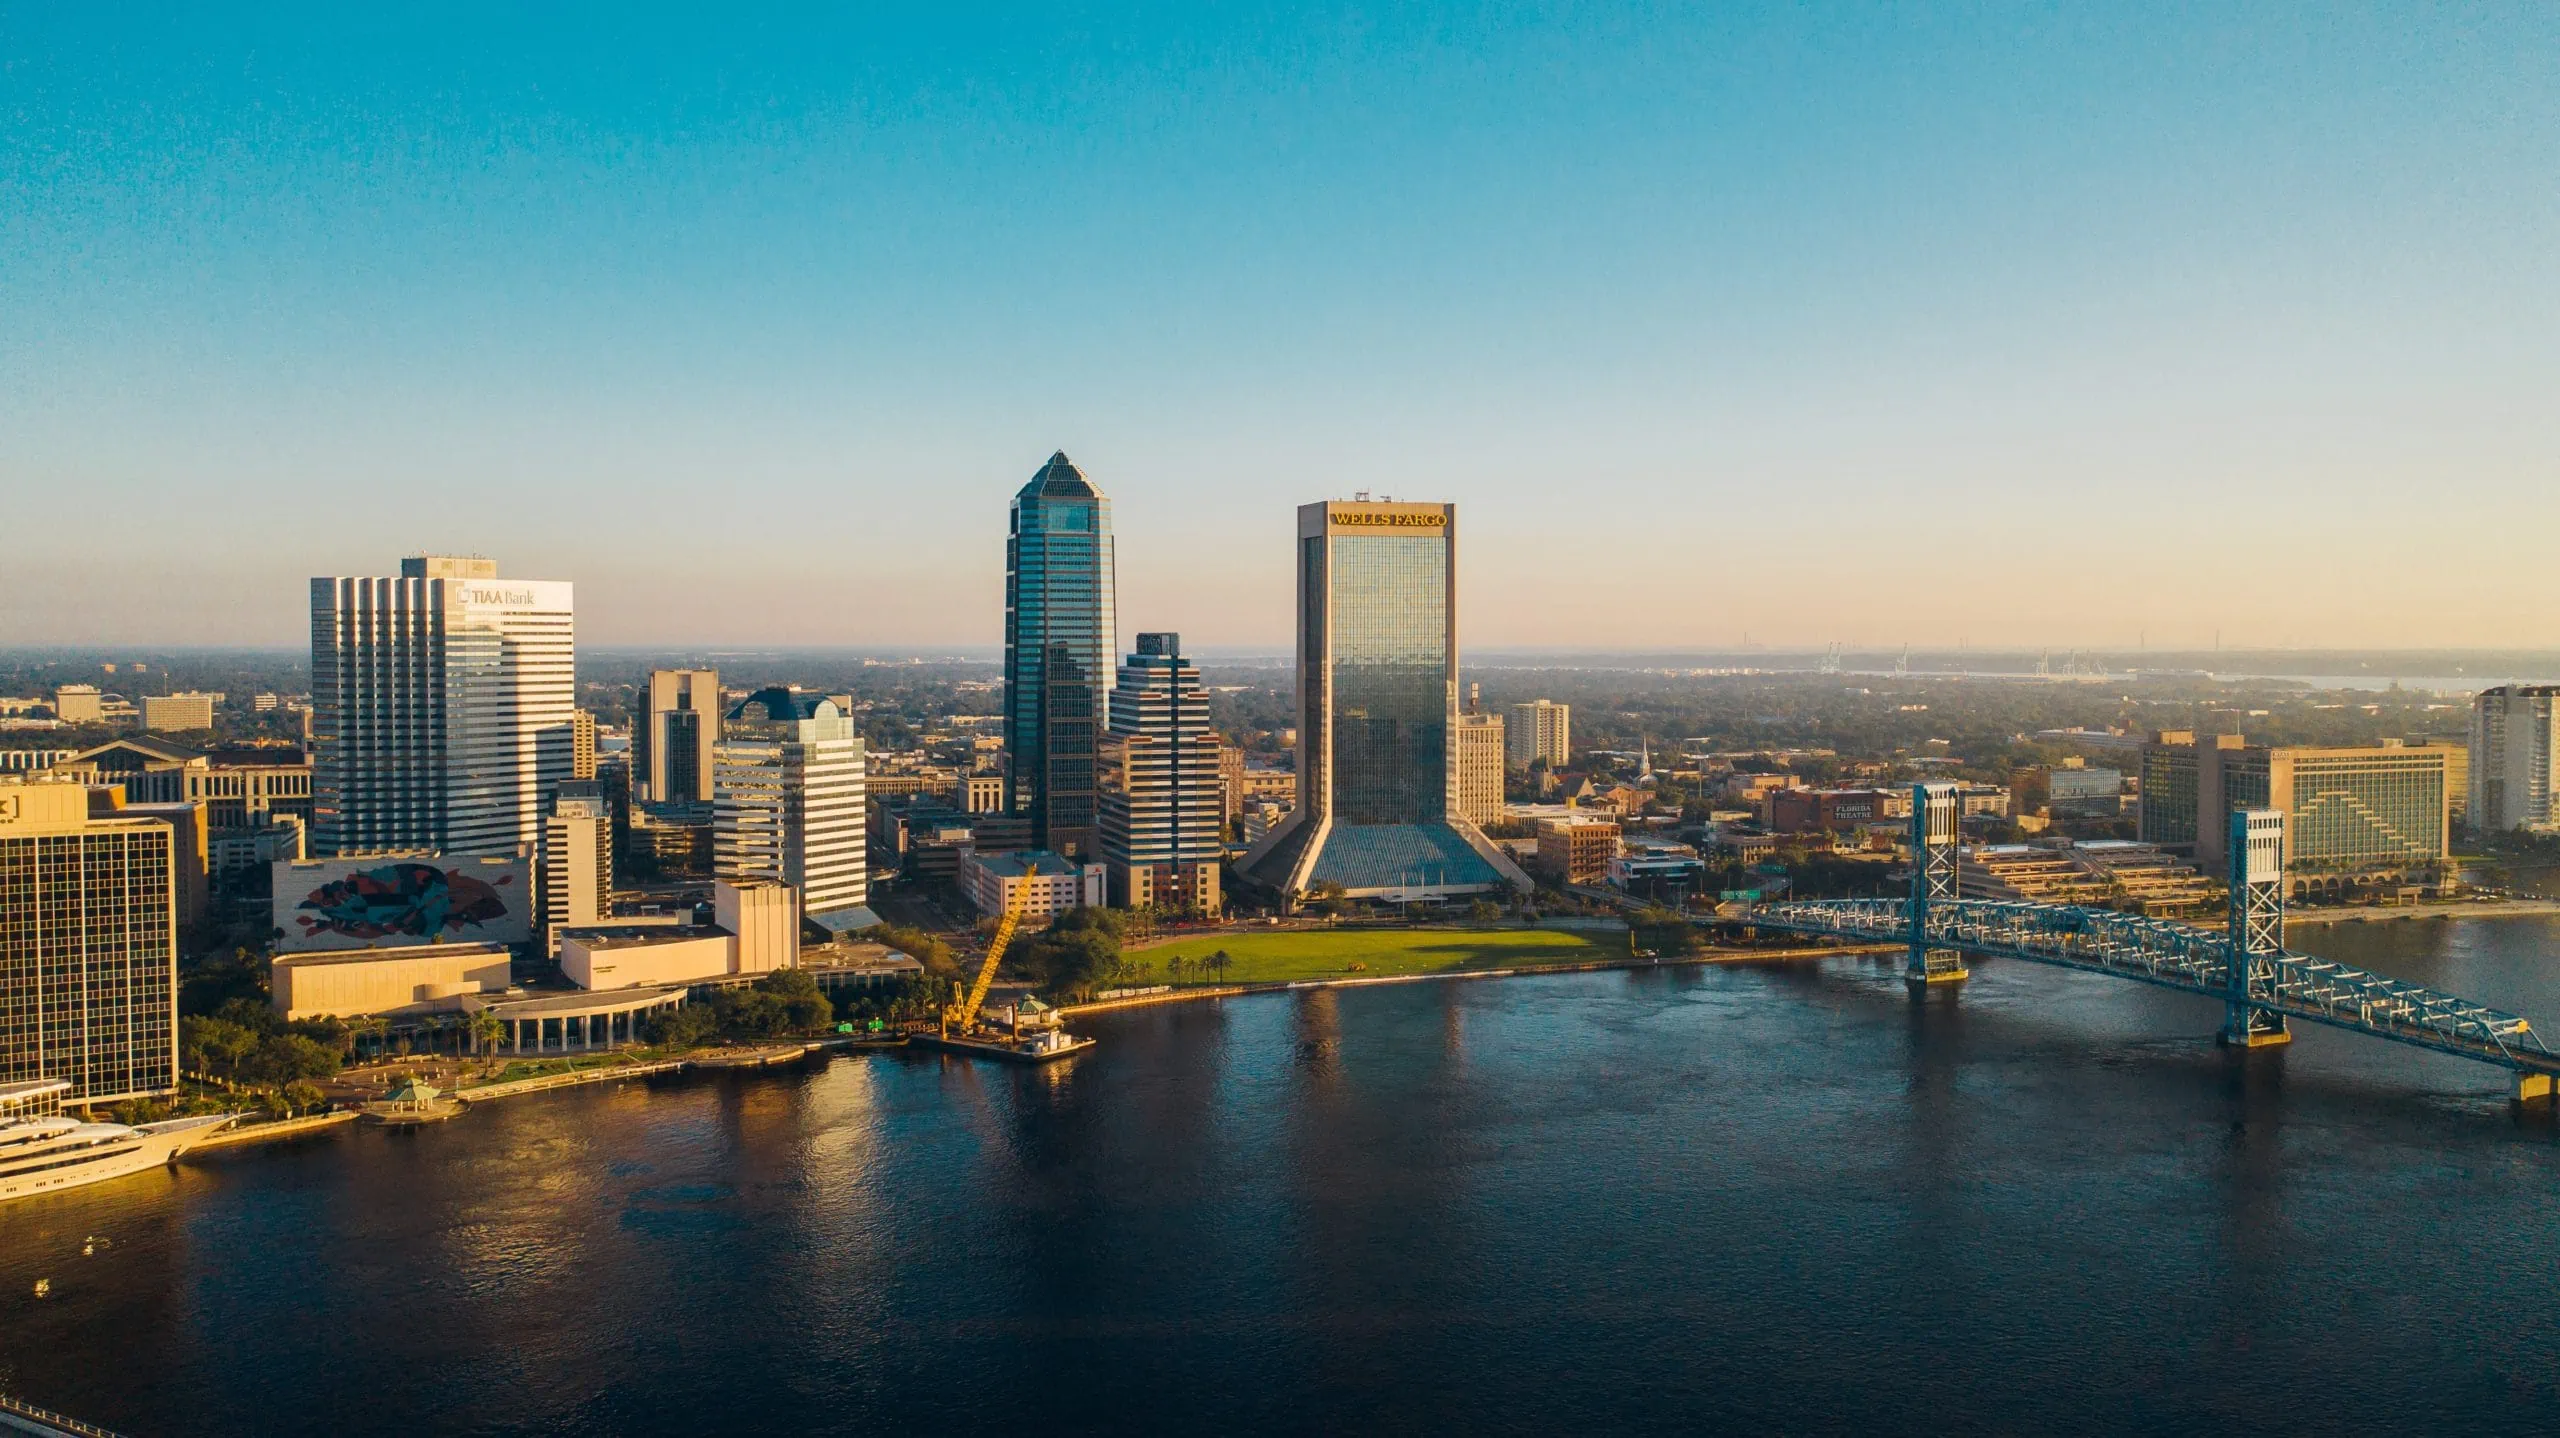 Jacksonville, FL skyline with businesses that have security systems